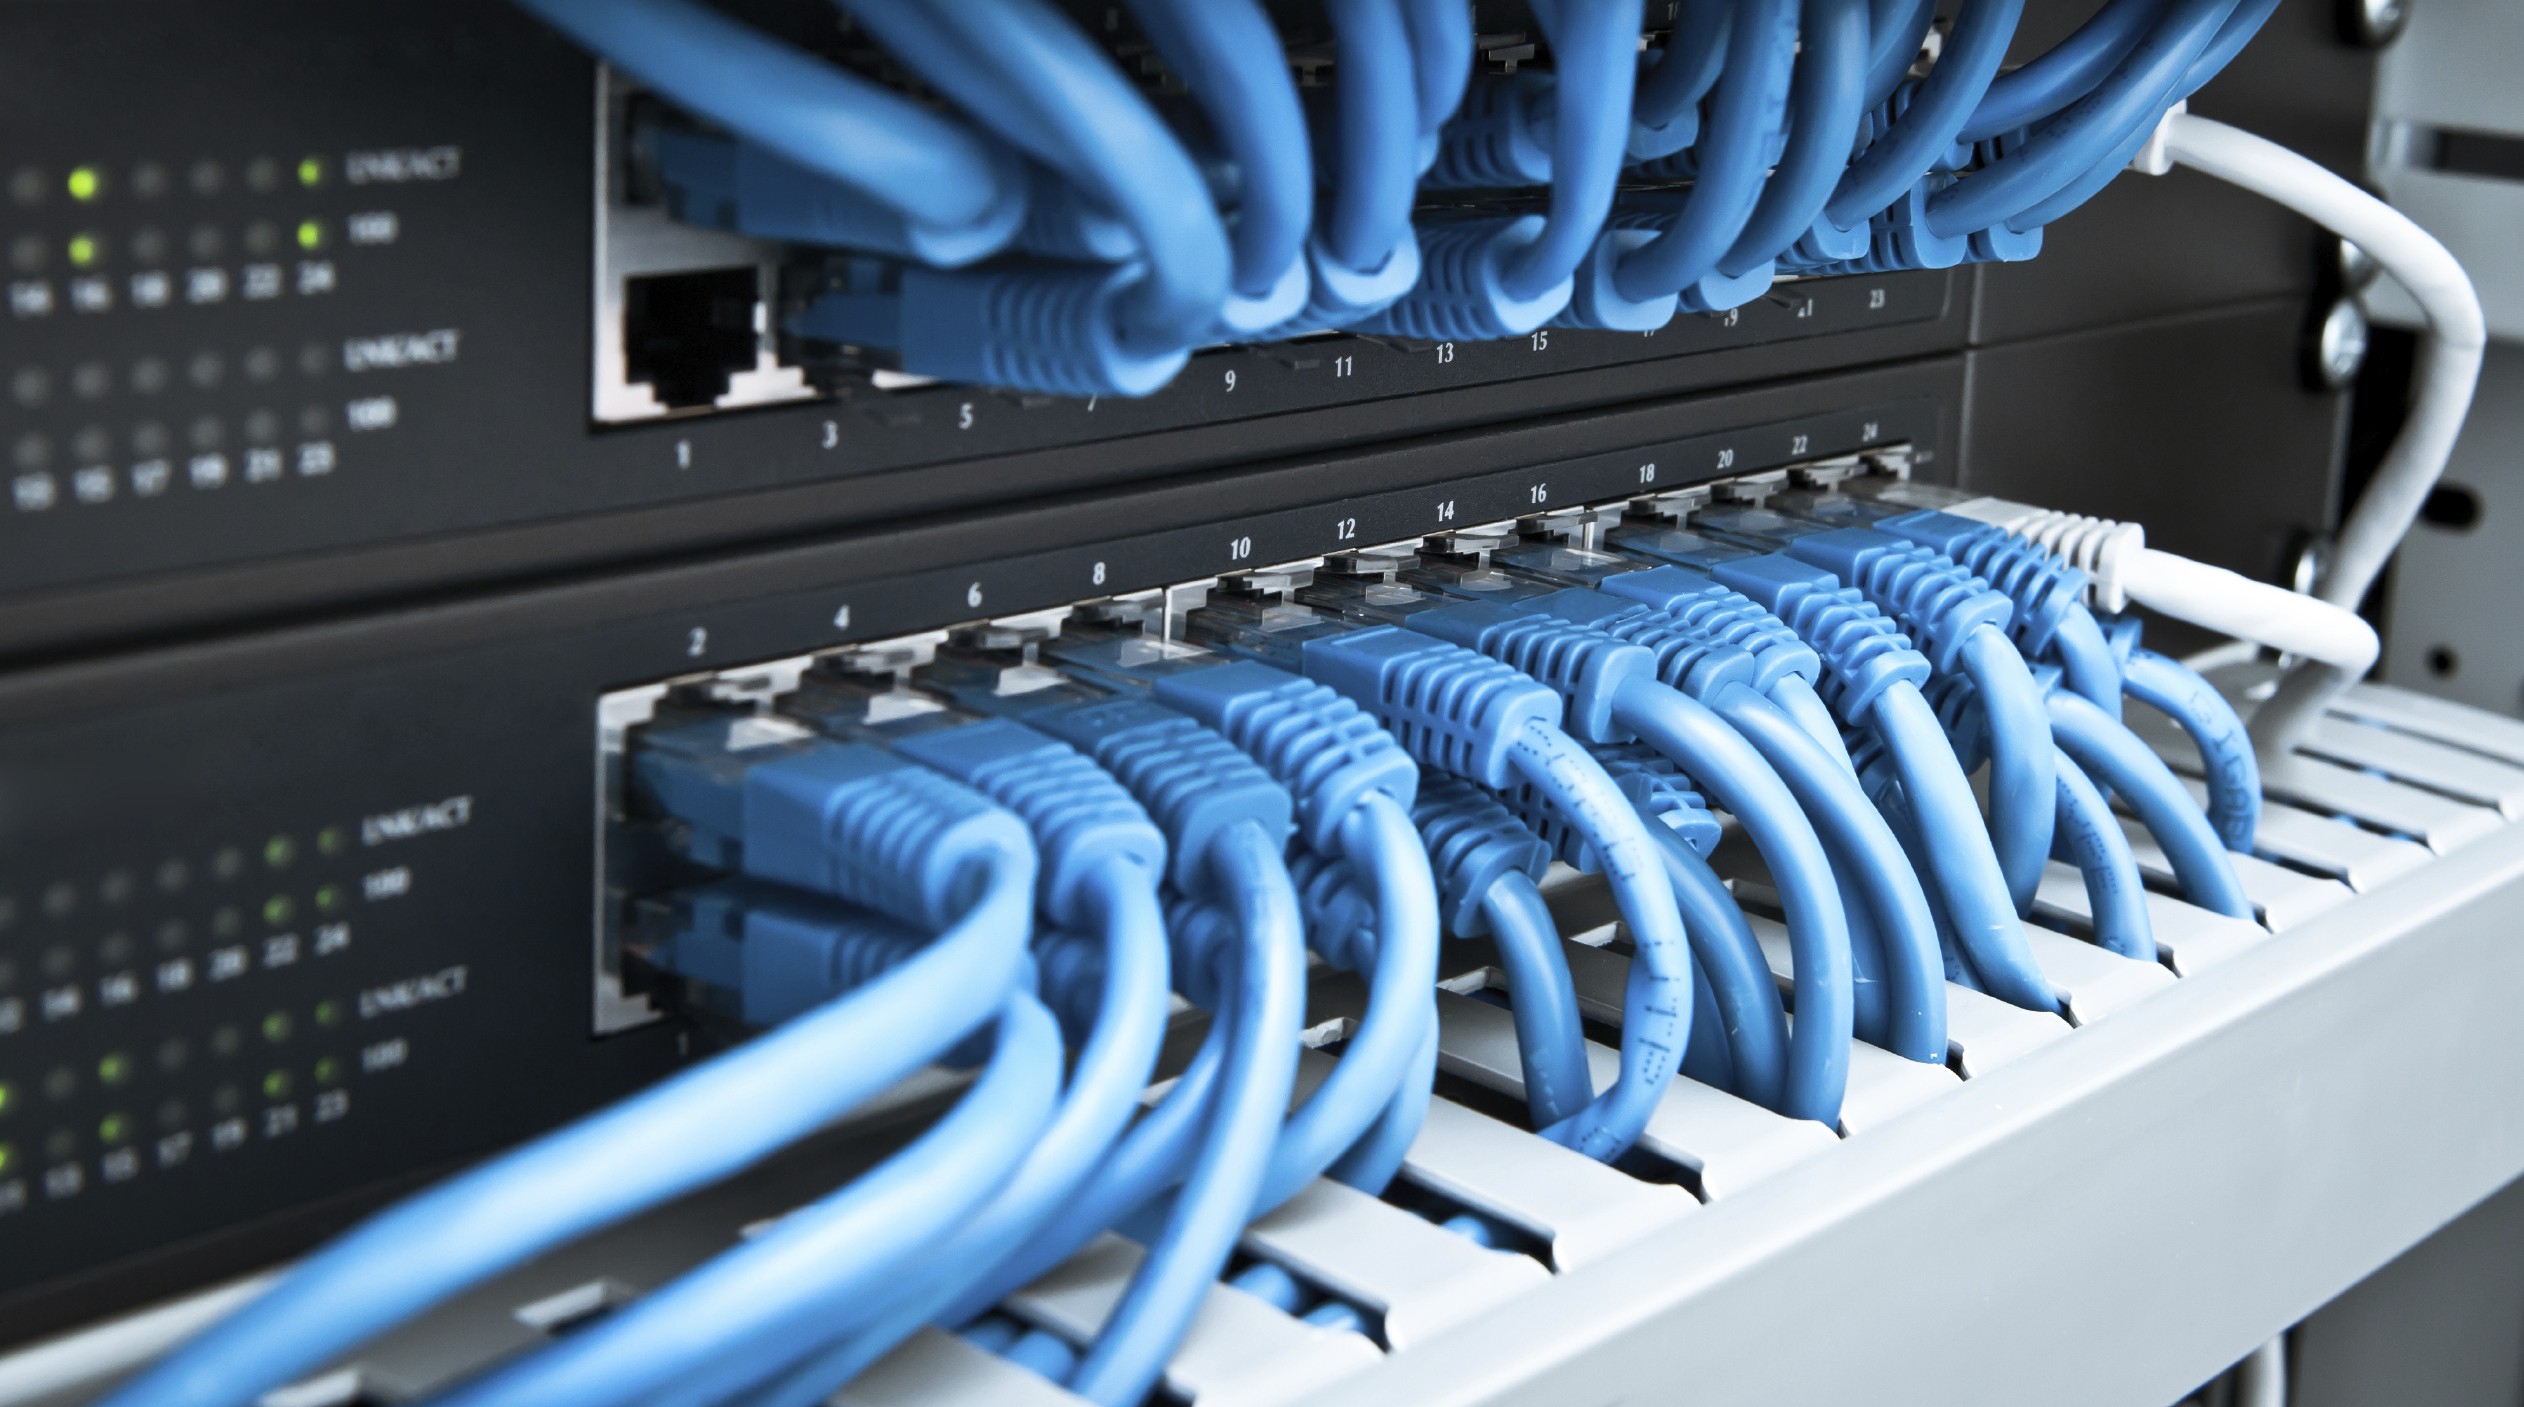 Barbourmeade Kentucky High Quality Voice & Data Network Cabling Provider